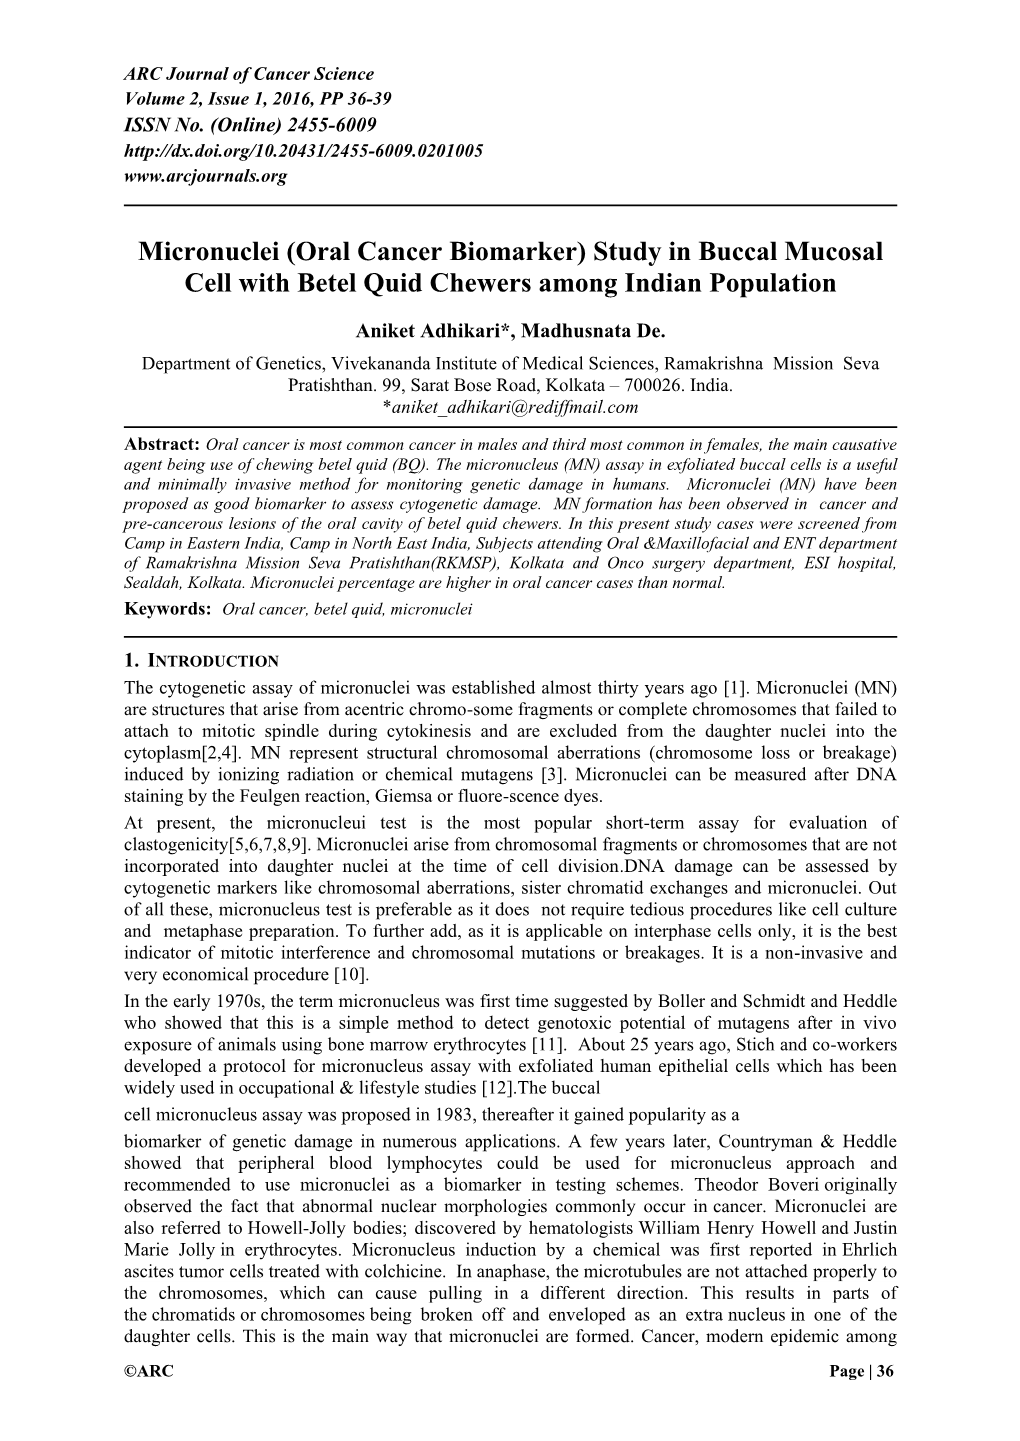 Micronuclei (Oral Cancer Biomarker) Study in Buccal Mucosal Cell with Betel Quid Chewers Among Indian Population